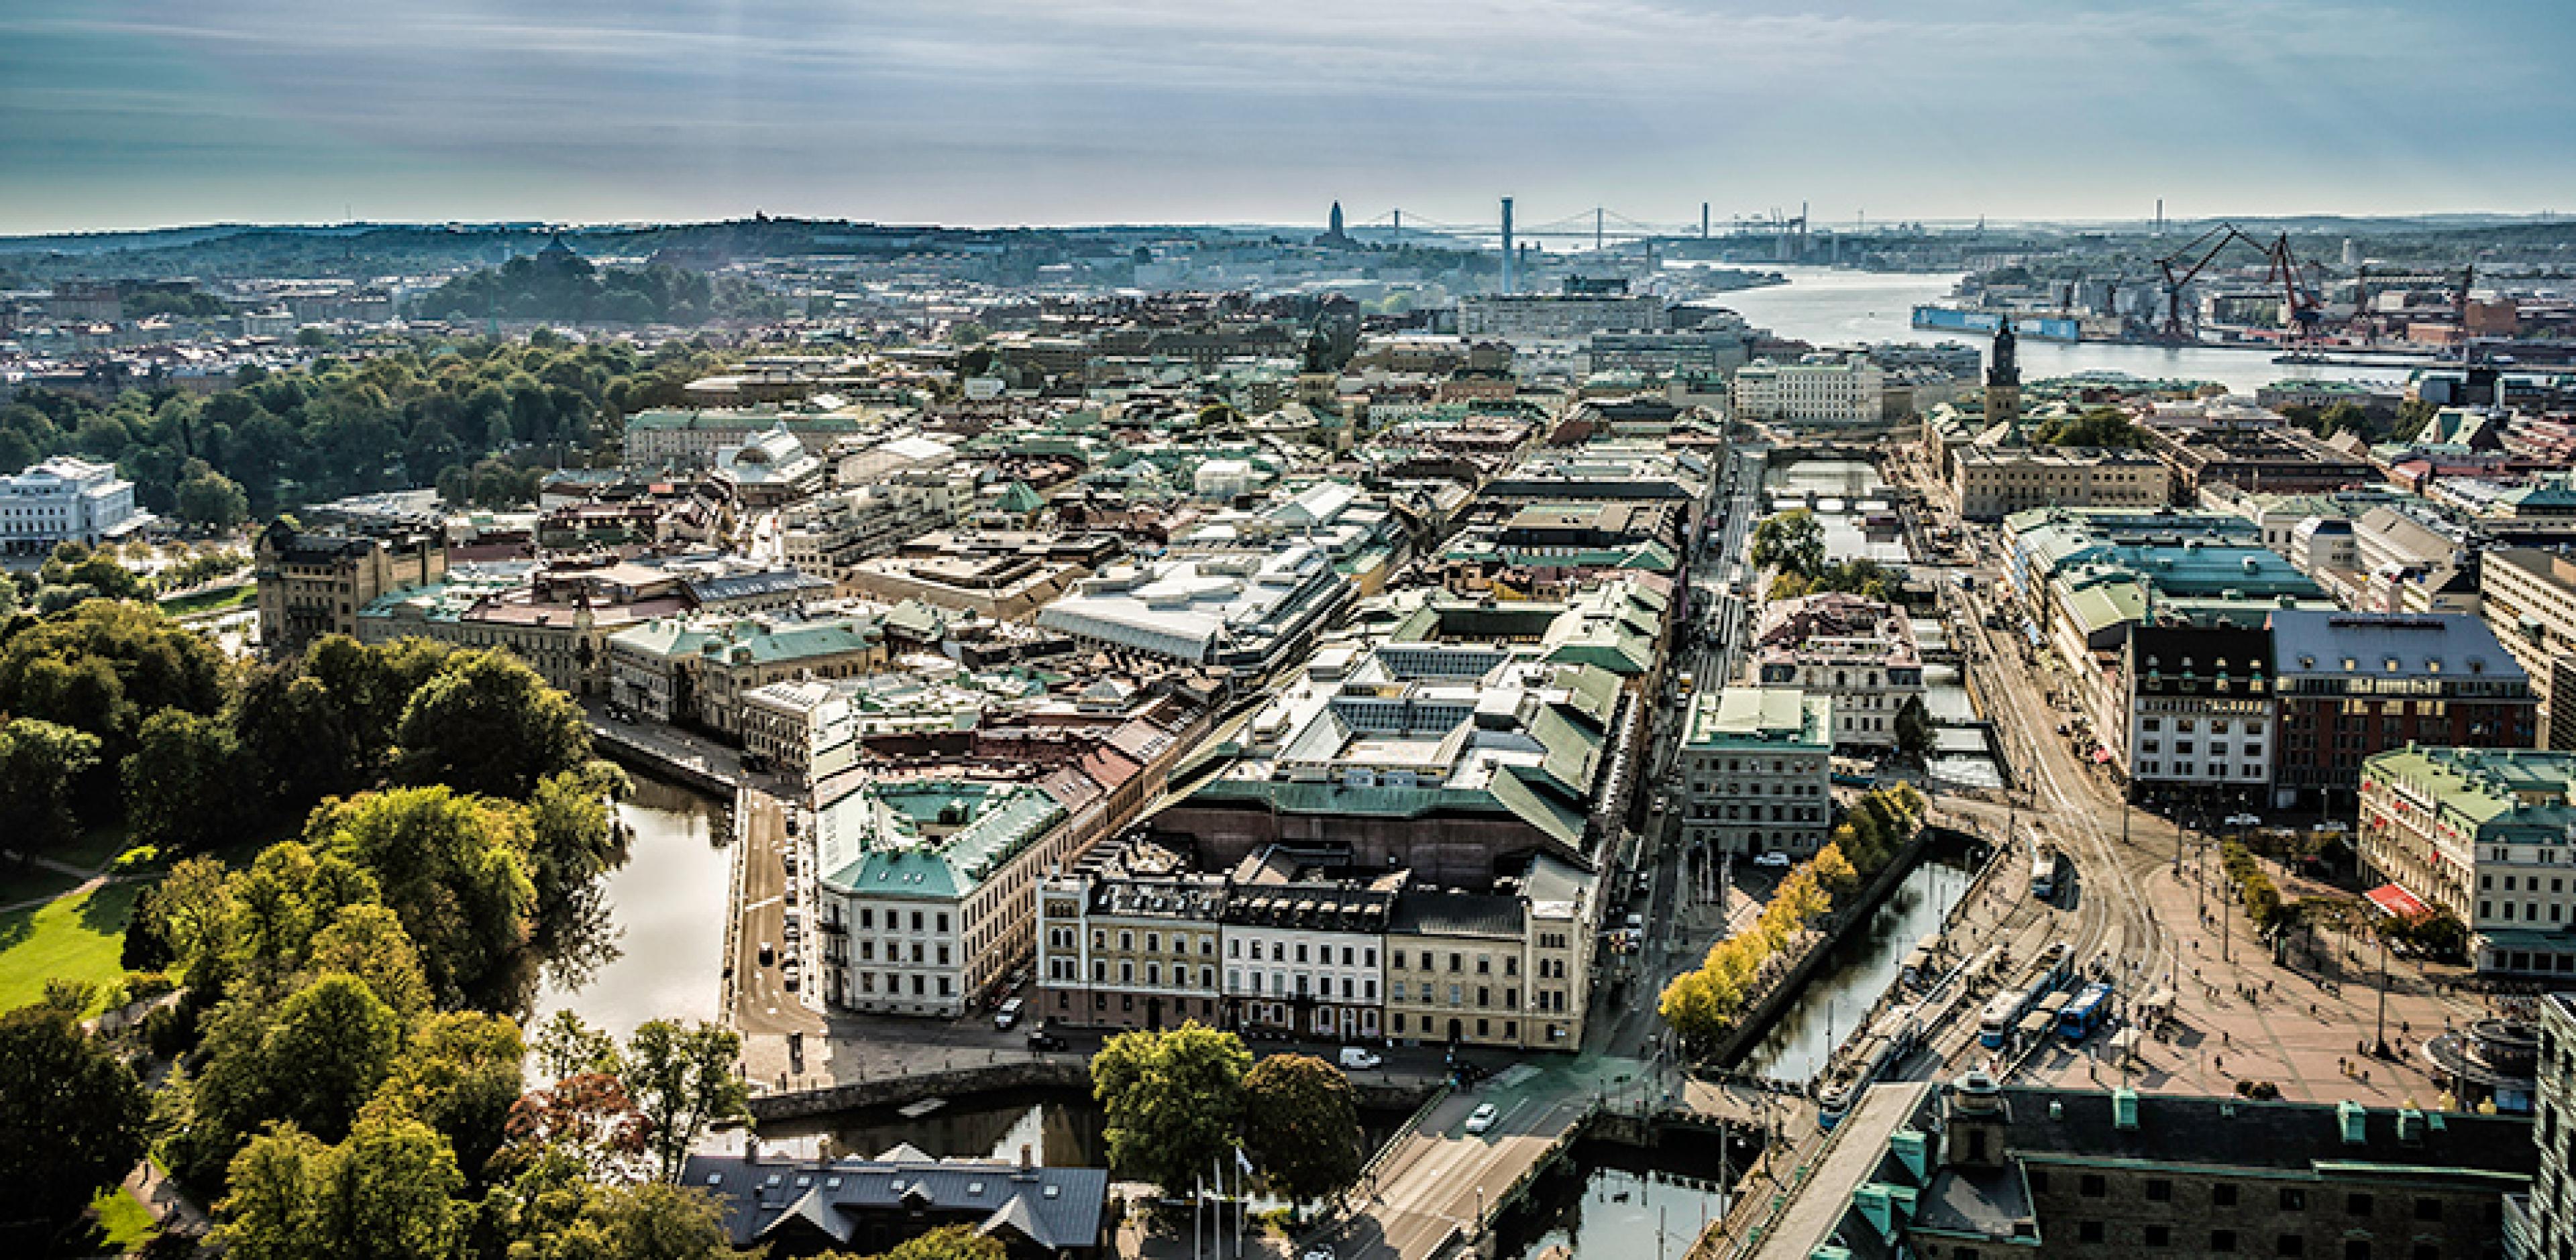 aerial view of gothenburg sweden showing historic city center and canalsfrom above, with port buildings in the background on a sunny day